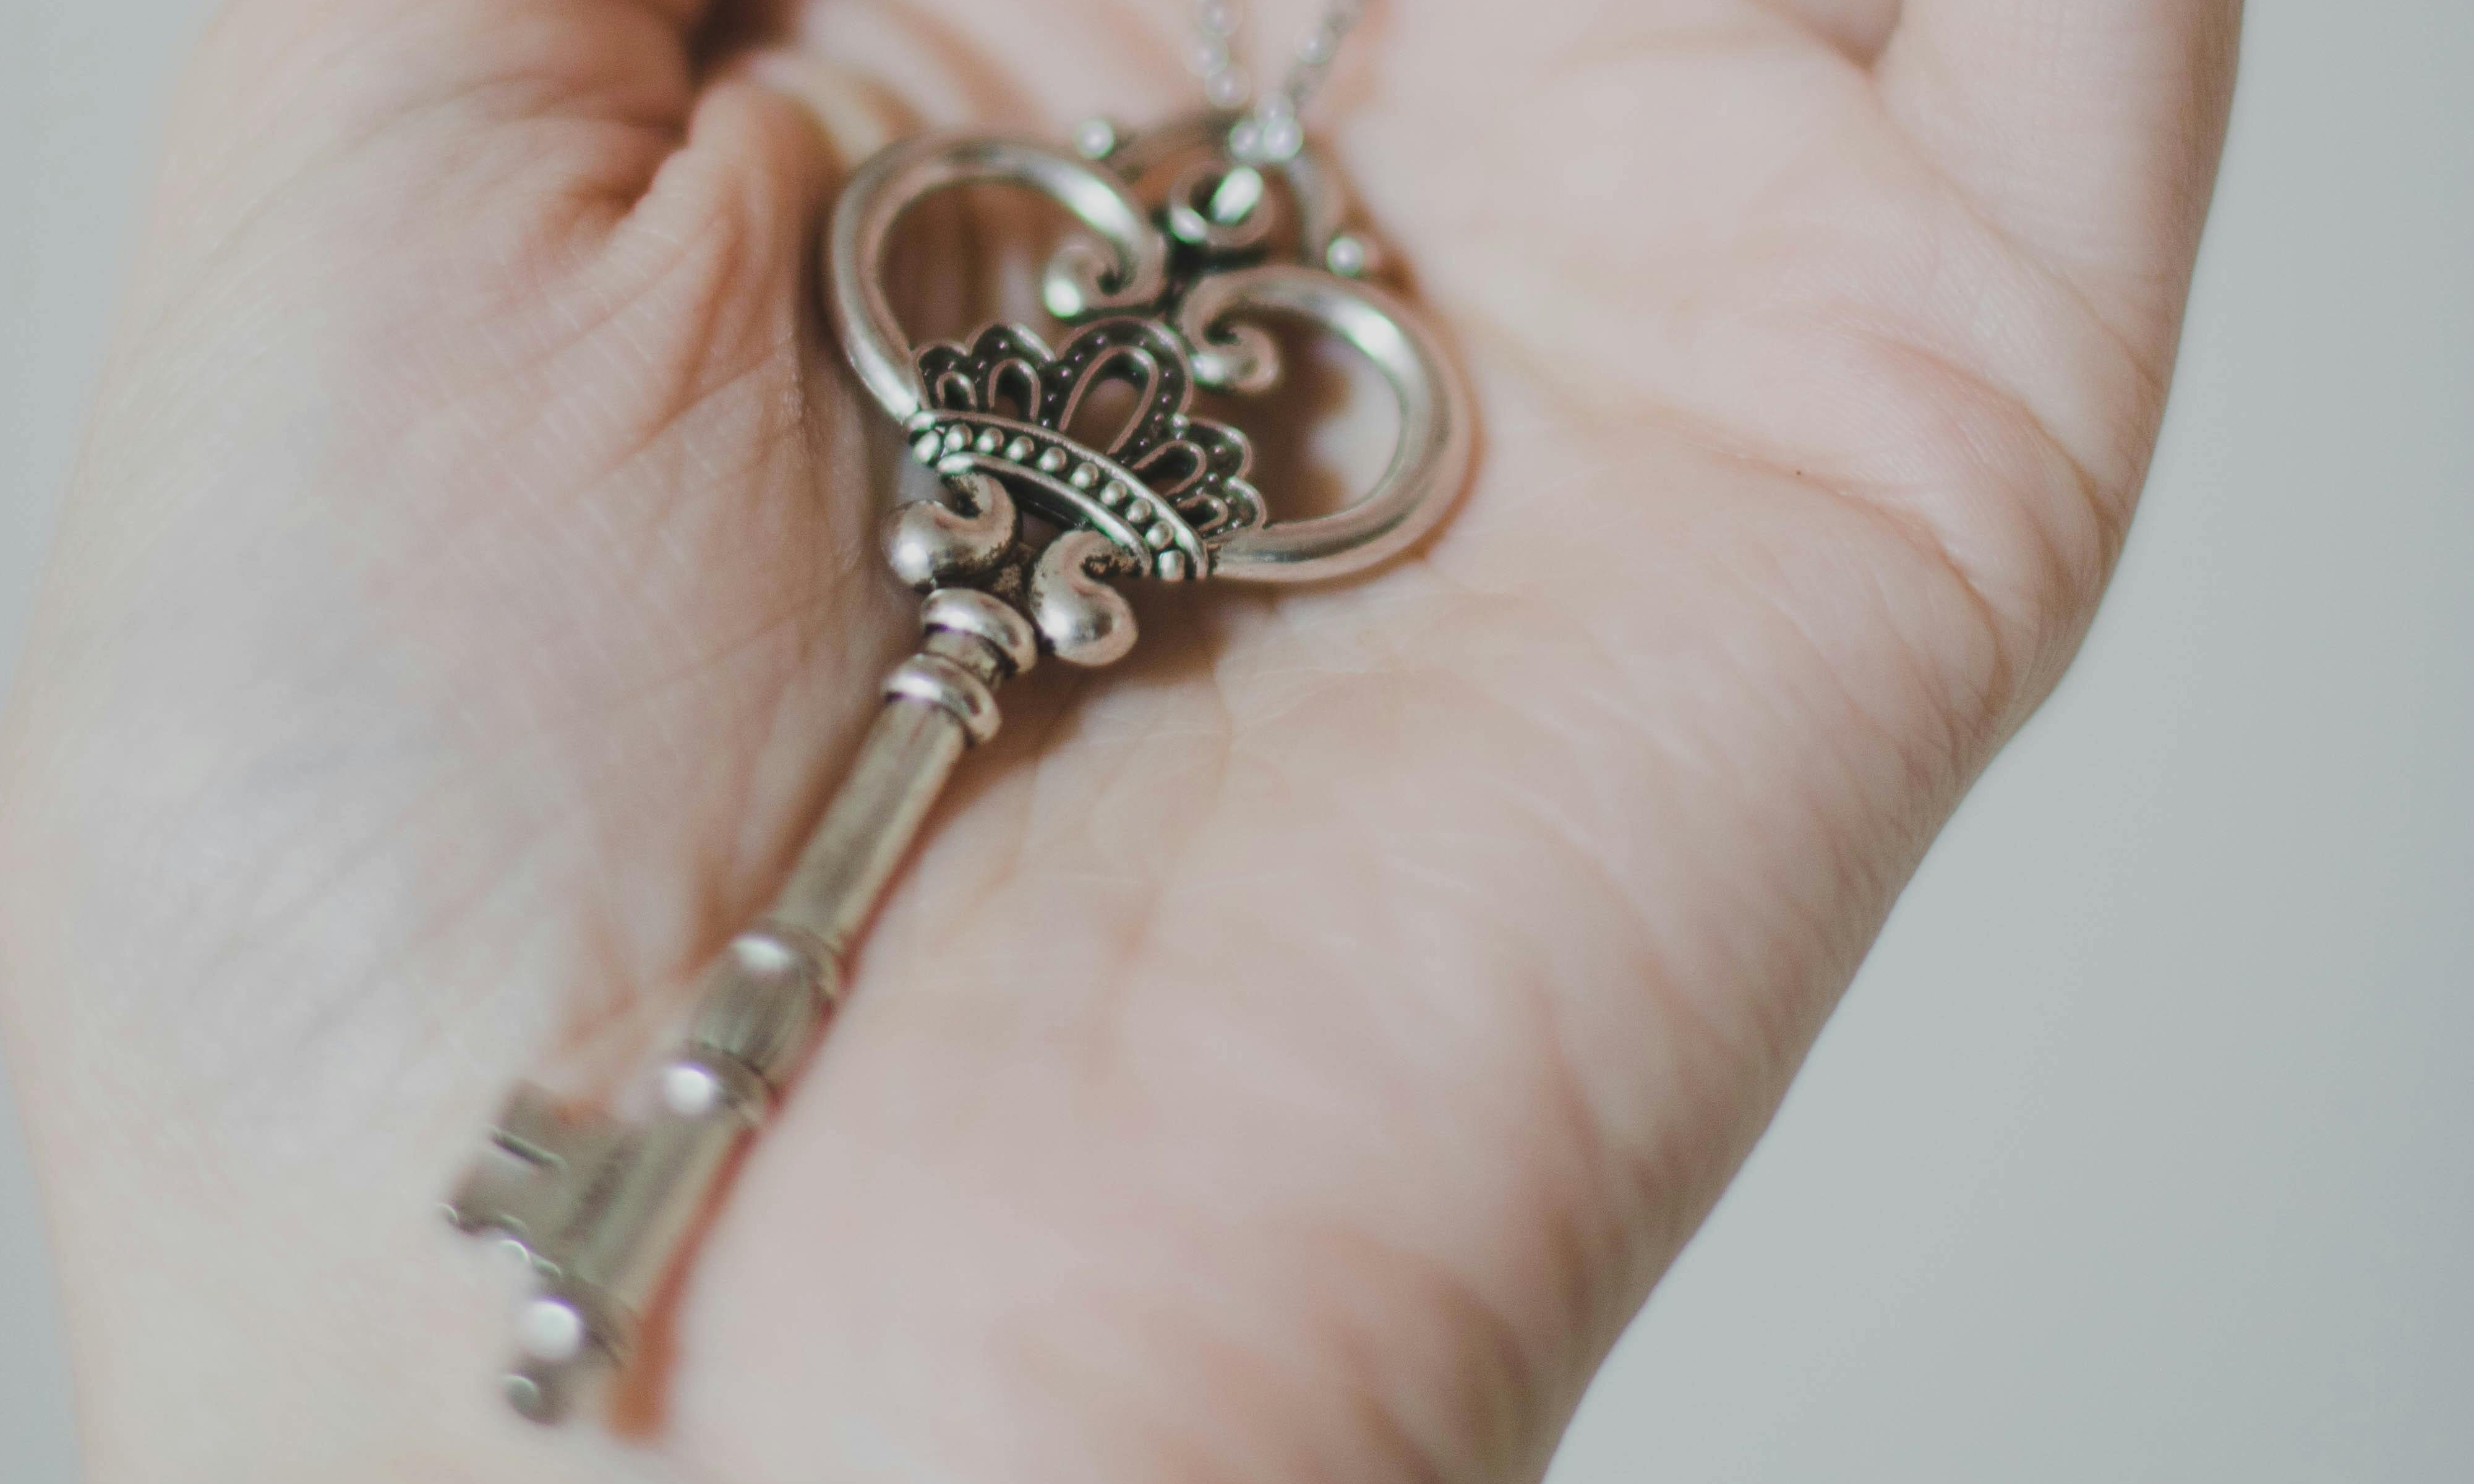 A small key in the palm of a hand | Source: Pexels